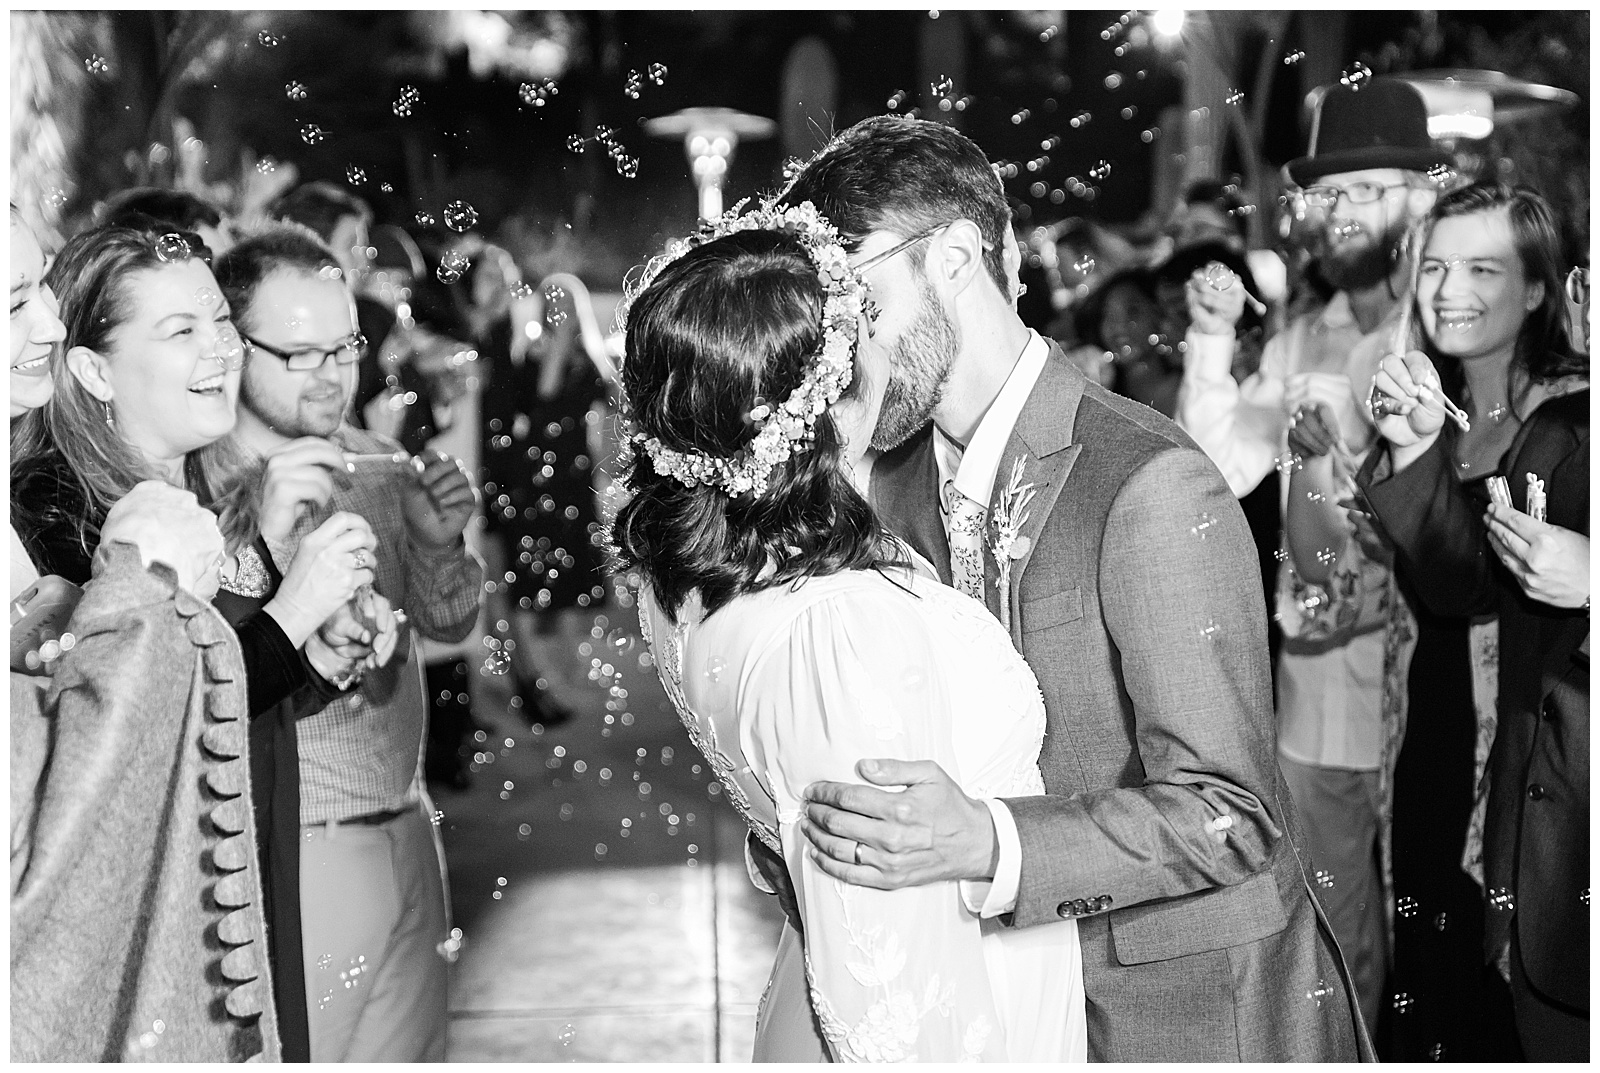 Husband and wife kissing in a swarm of bubbles.